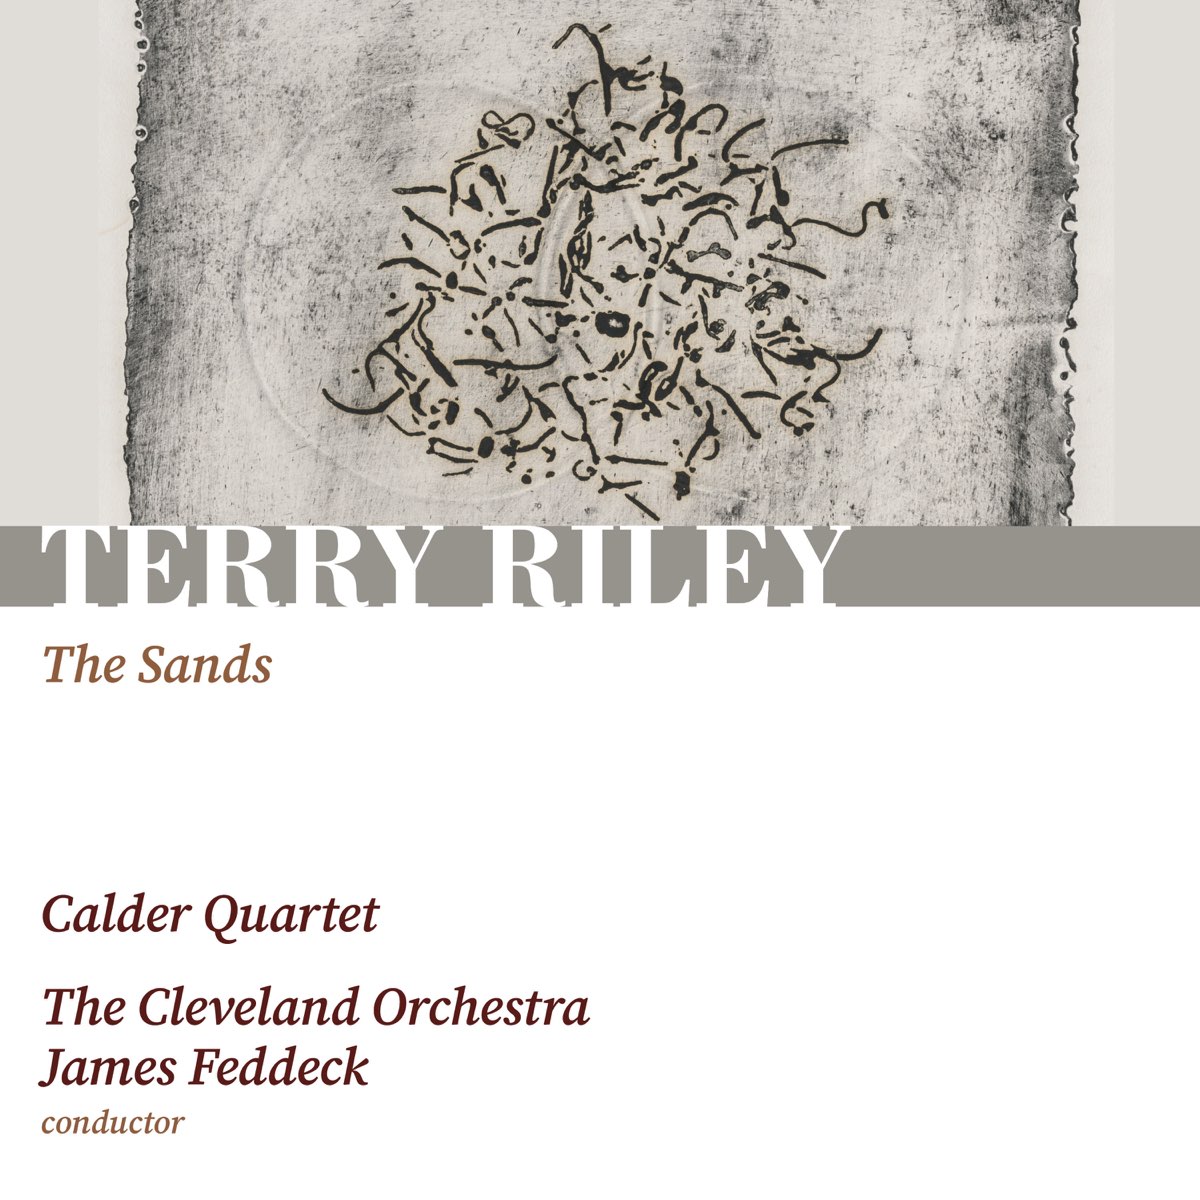 Riley: The Sands by Terry Riley, The Cleveland Orchestra, Calder Quartet &  James Feddeck on Apple Music